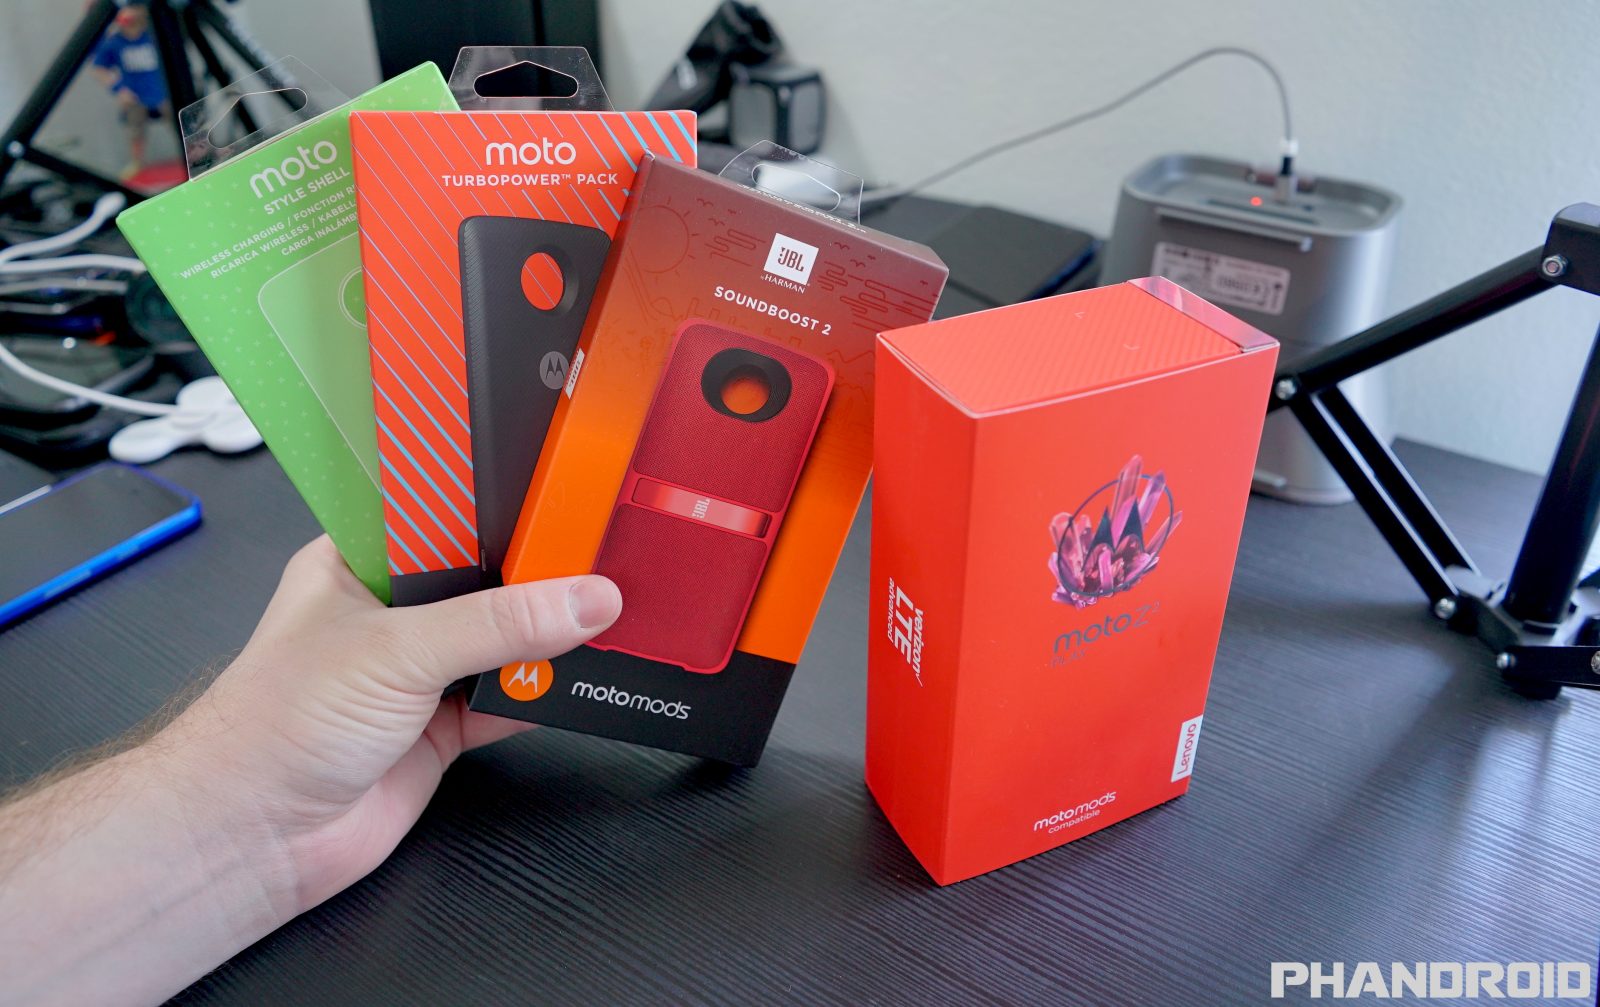 You can now buy Moto Mods with the Moto Z Market app